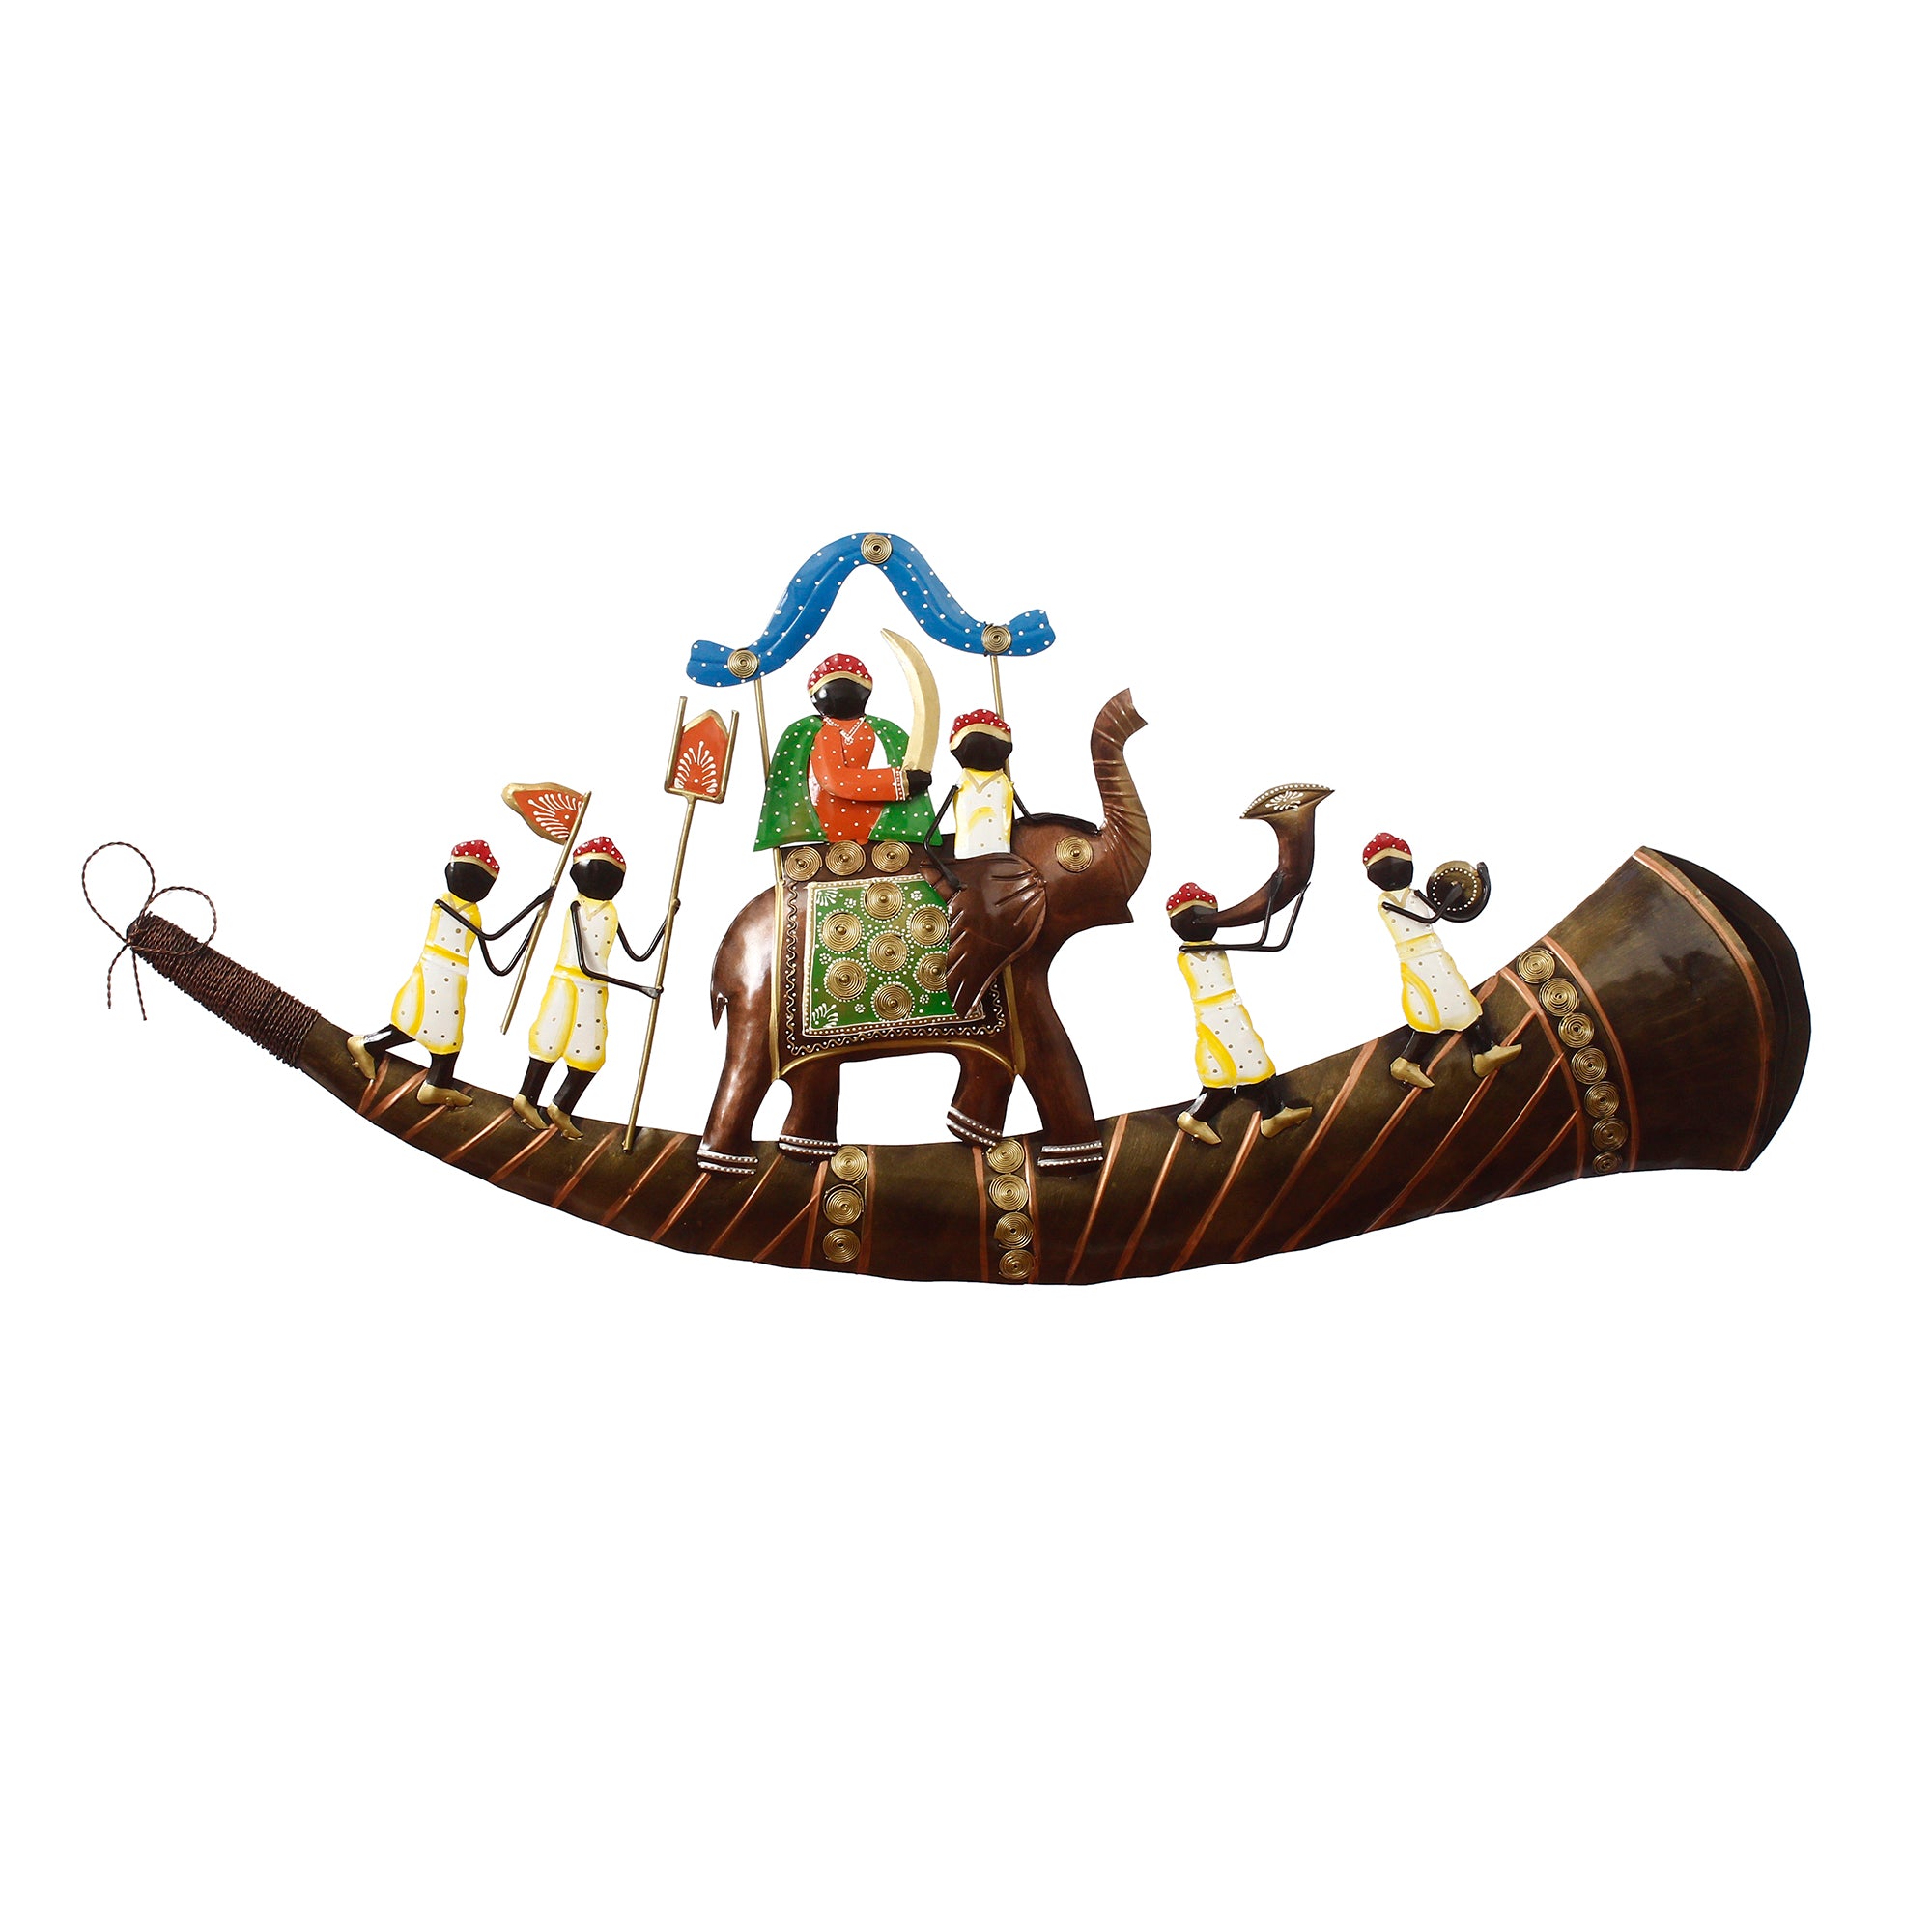 Royal Procession of King on Shehnai Decorative Iron Wall Hanging/Art (Brown, Blue and Green) 2